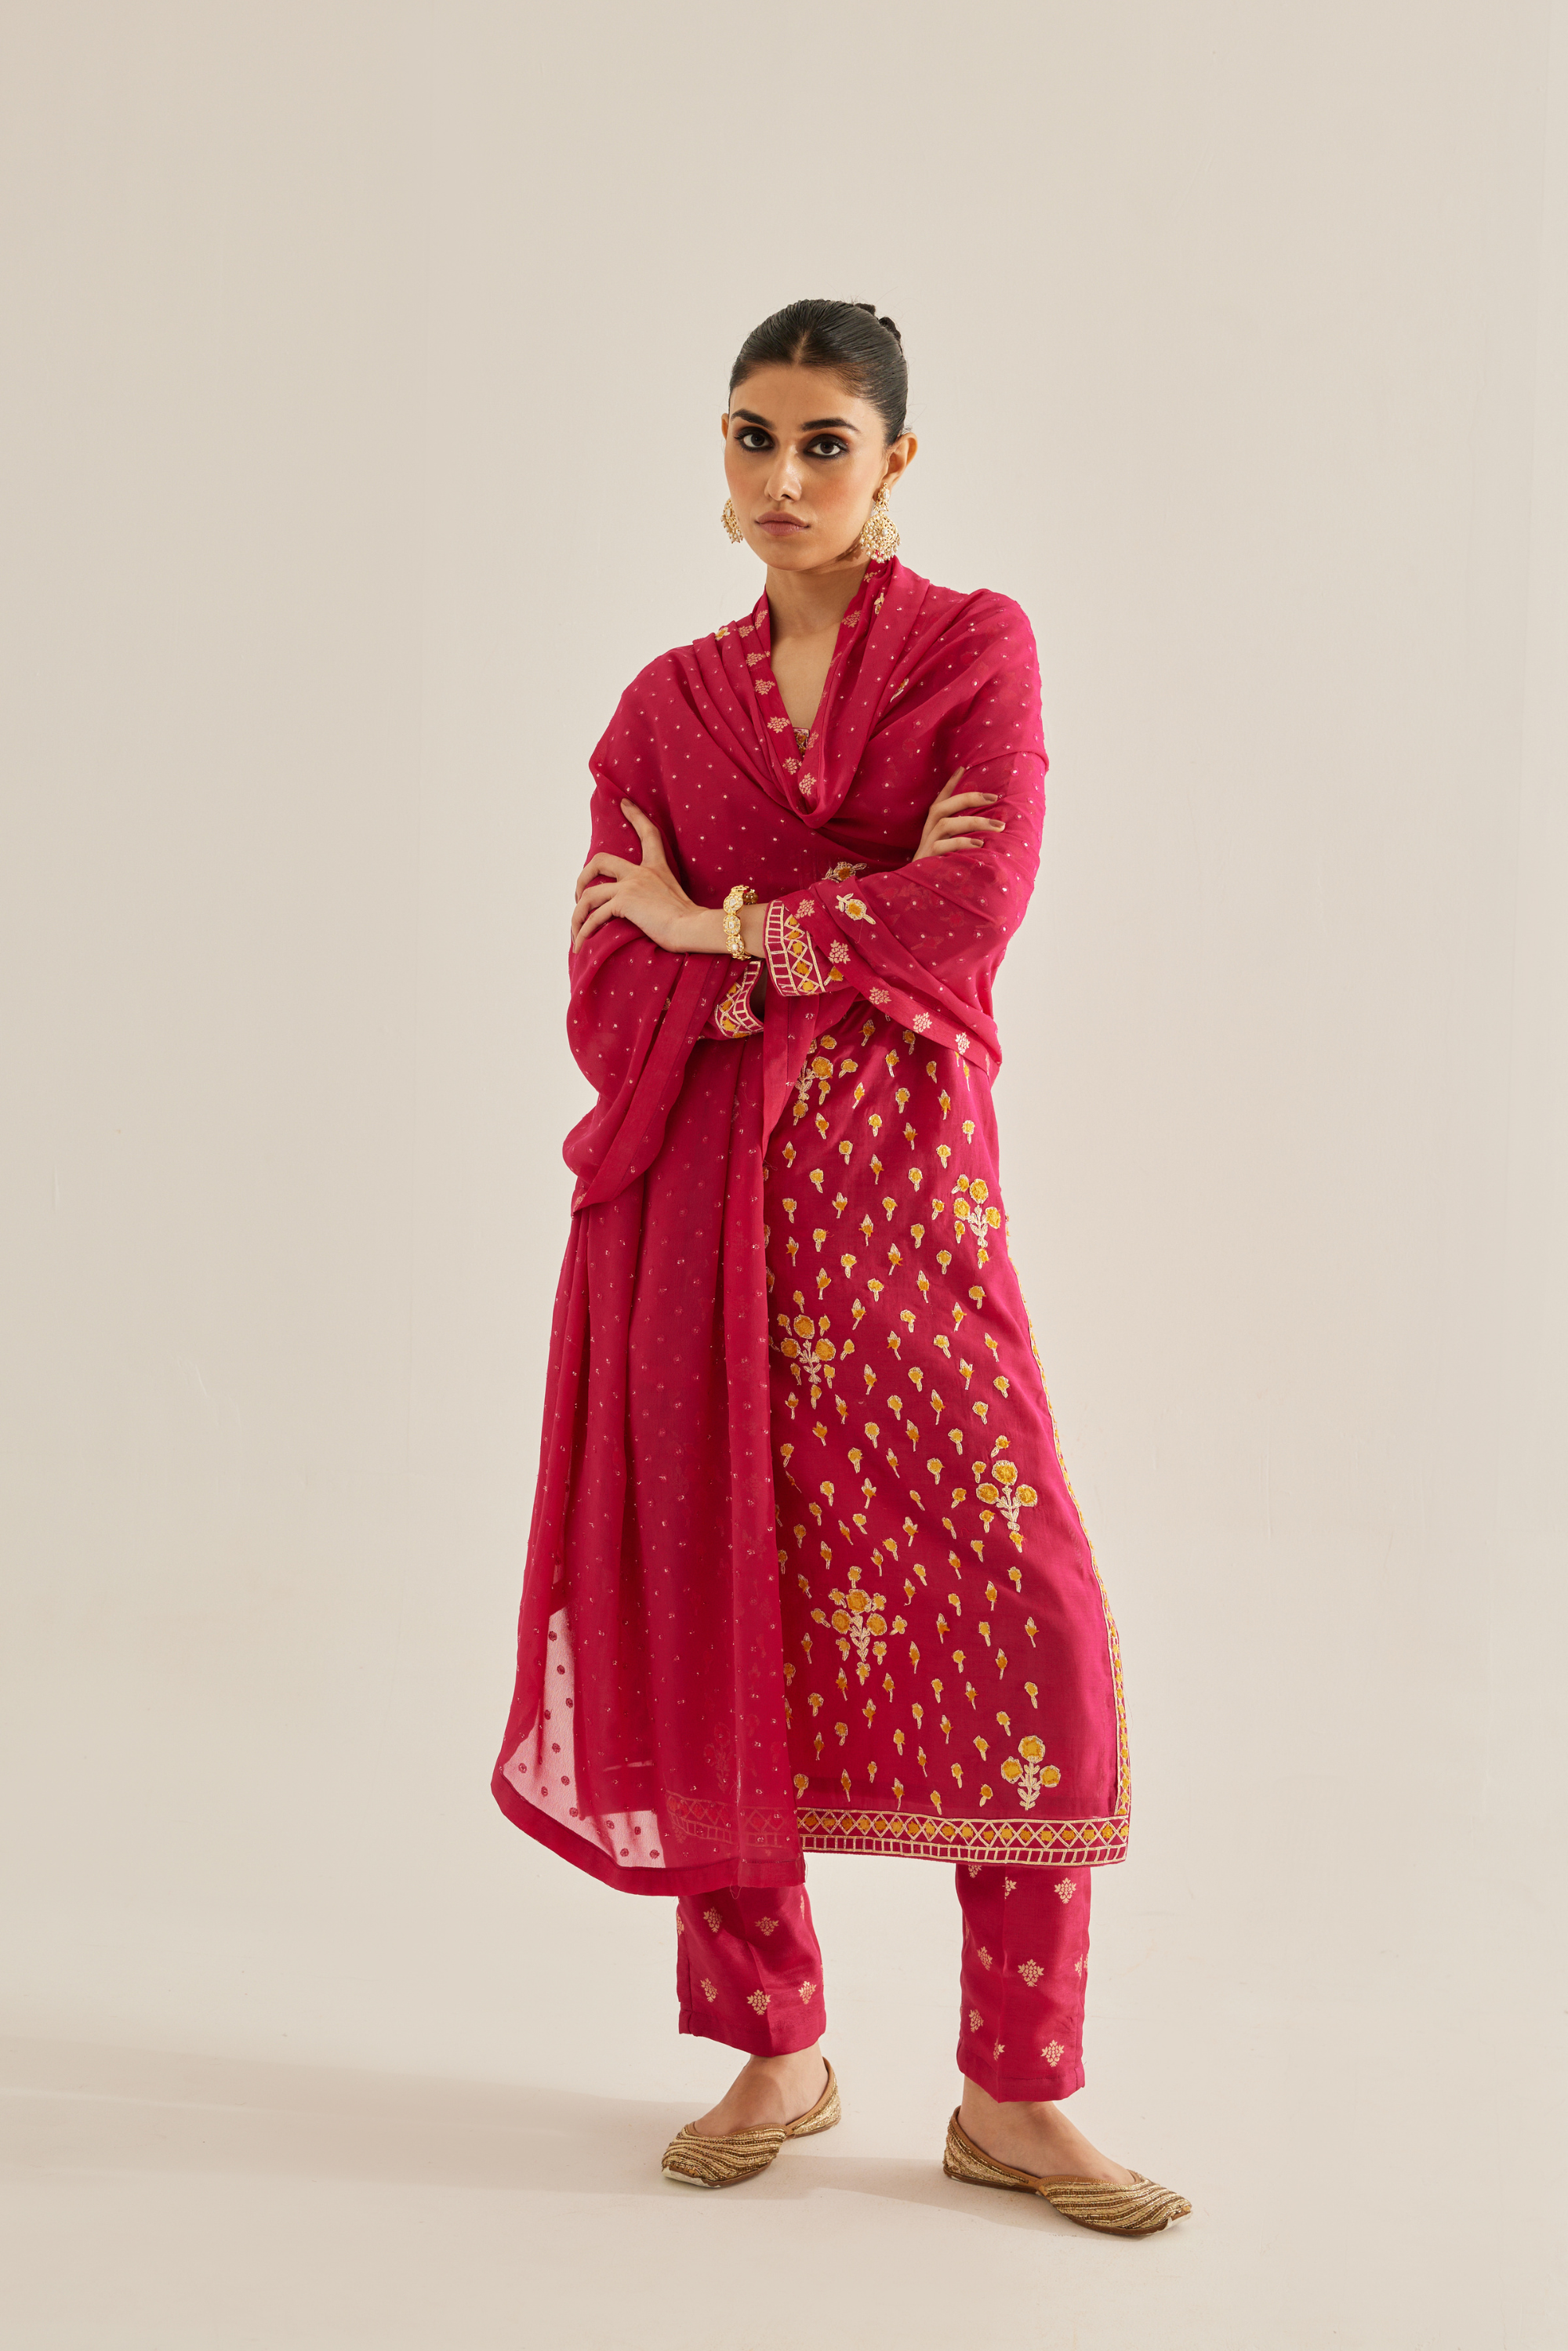 Gold Appliqued Embroidered Silk Chanderi Kurta And Dupatta With Trousers.